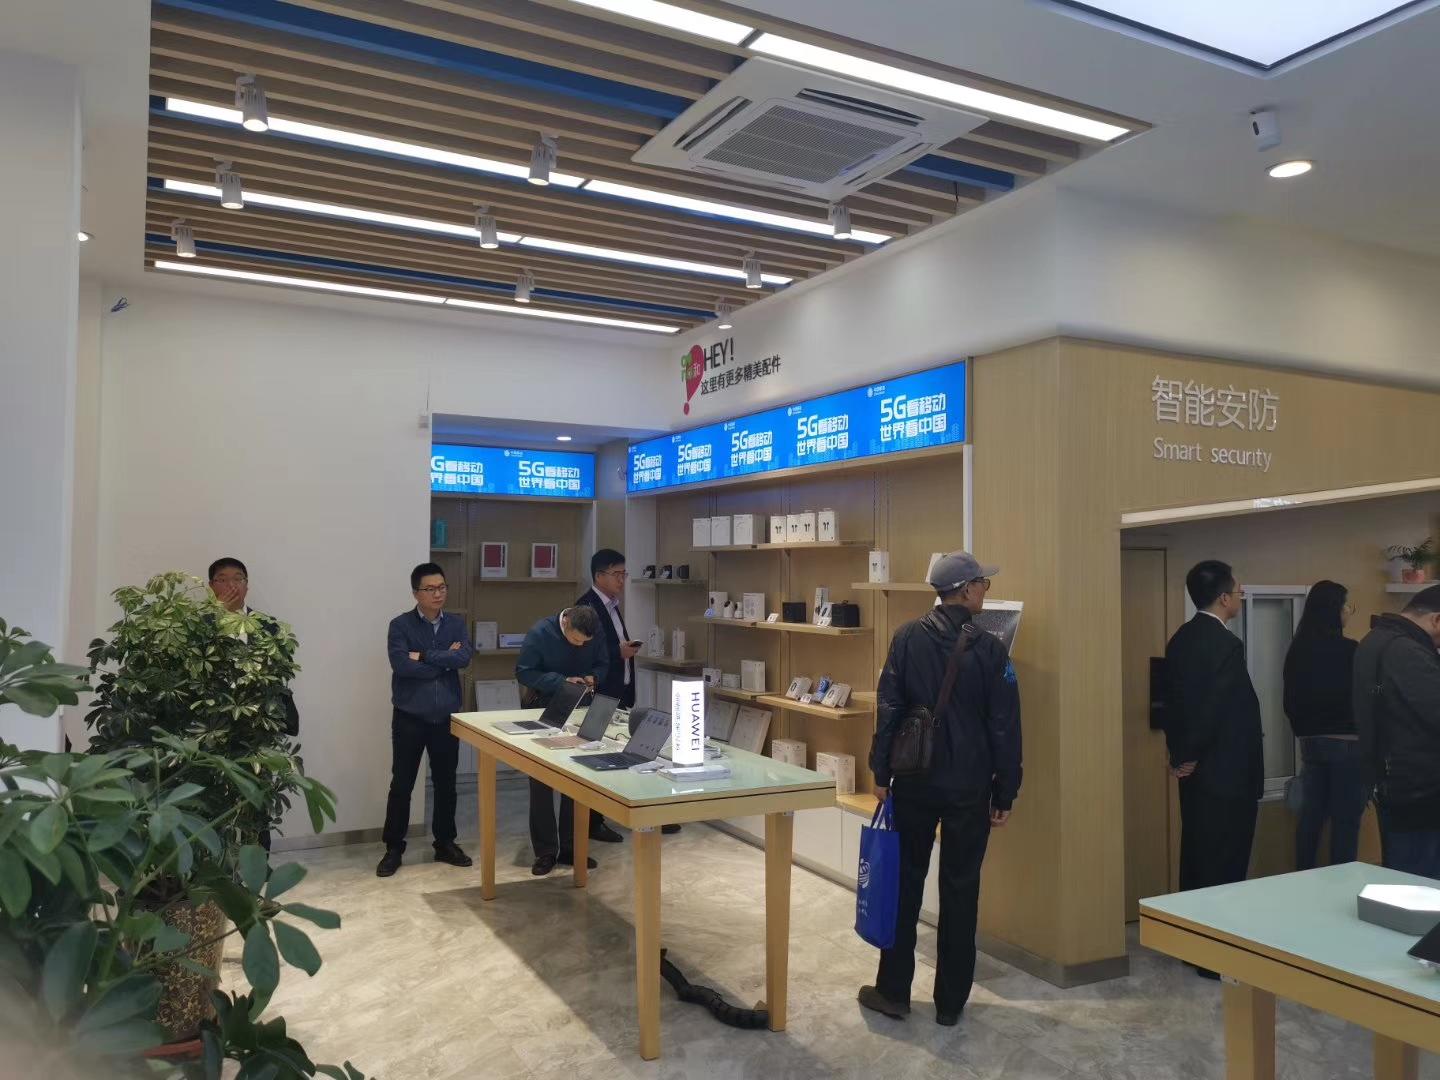 5g smart life experience store